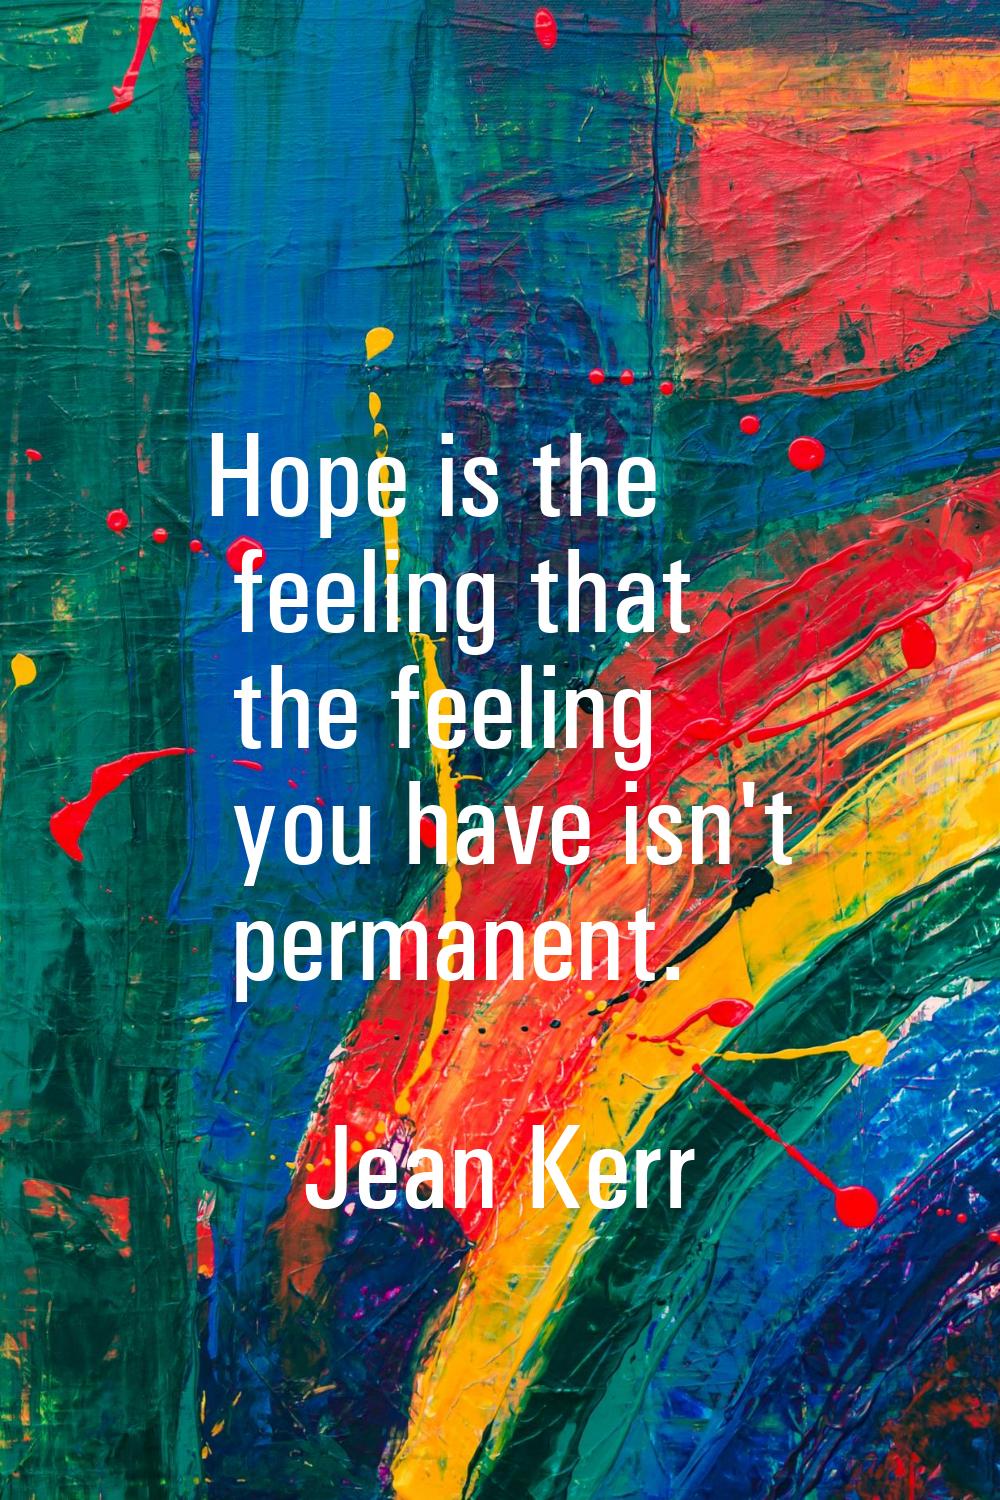 Hope is the feeling that the feeling you have isn't permanent.